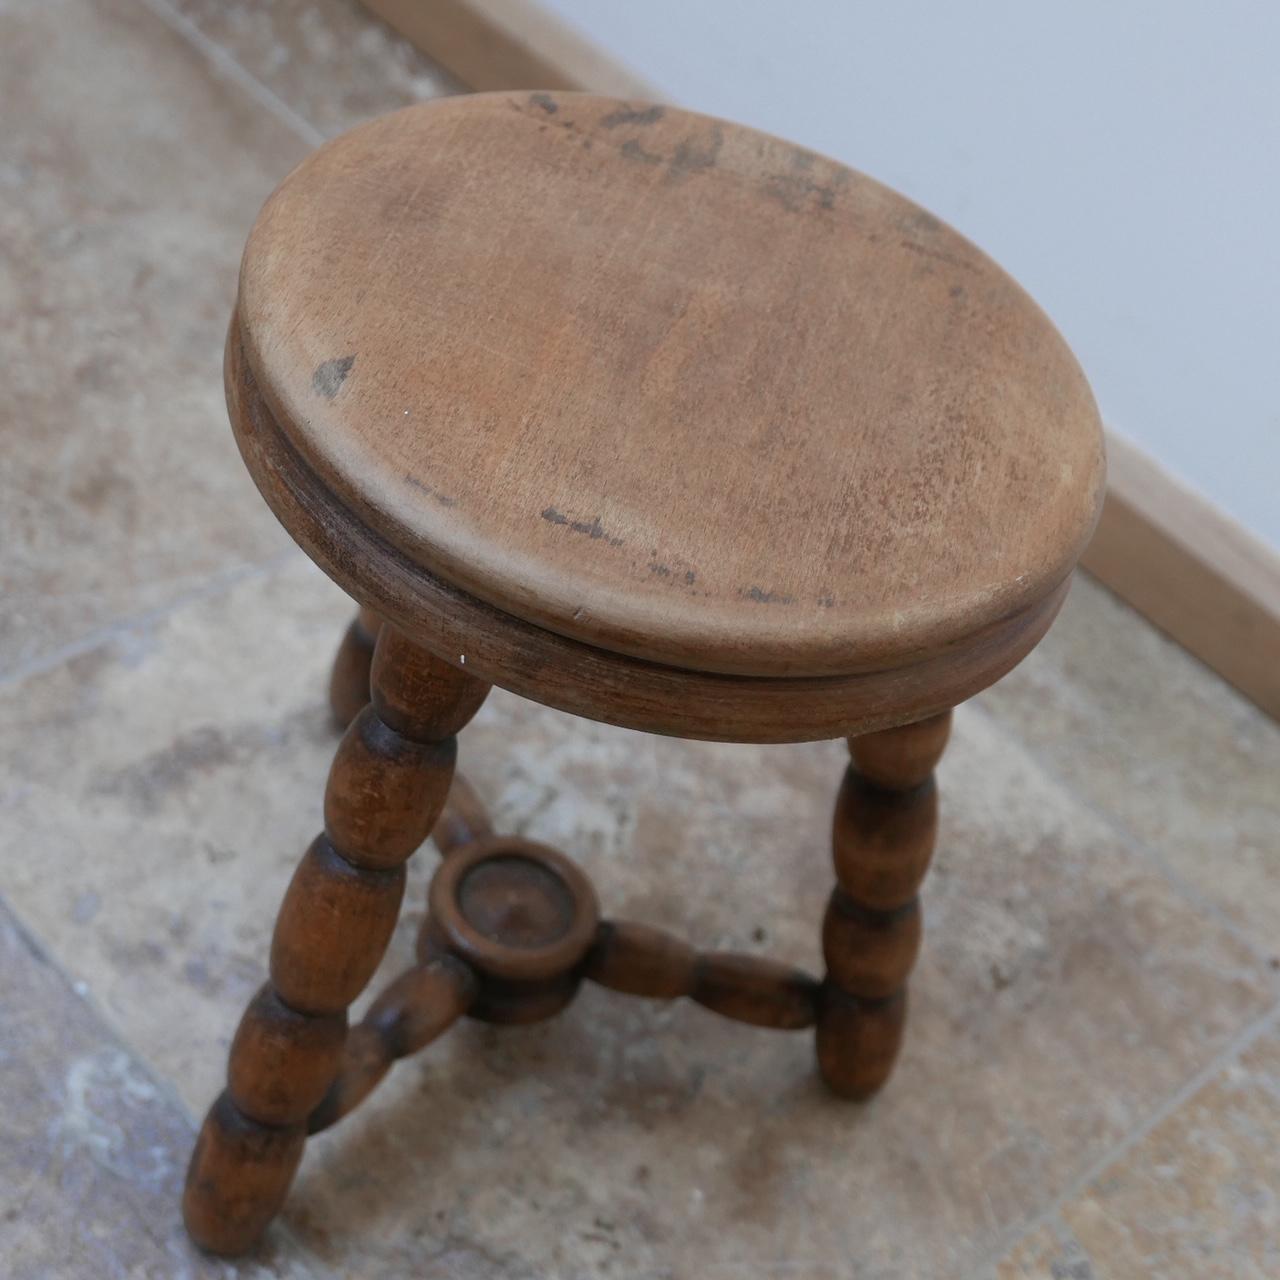 A stylish bobbin style low wooden stool, ideal for use as a low side table.

English, circa 1950s.

Patina and evidence of wear but generally good condition.

Dimensions: 25 diameter x 30 height in cm.